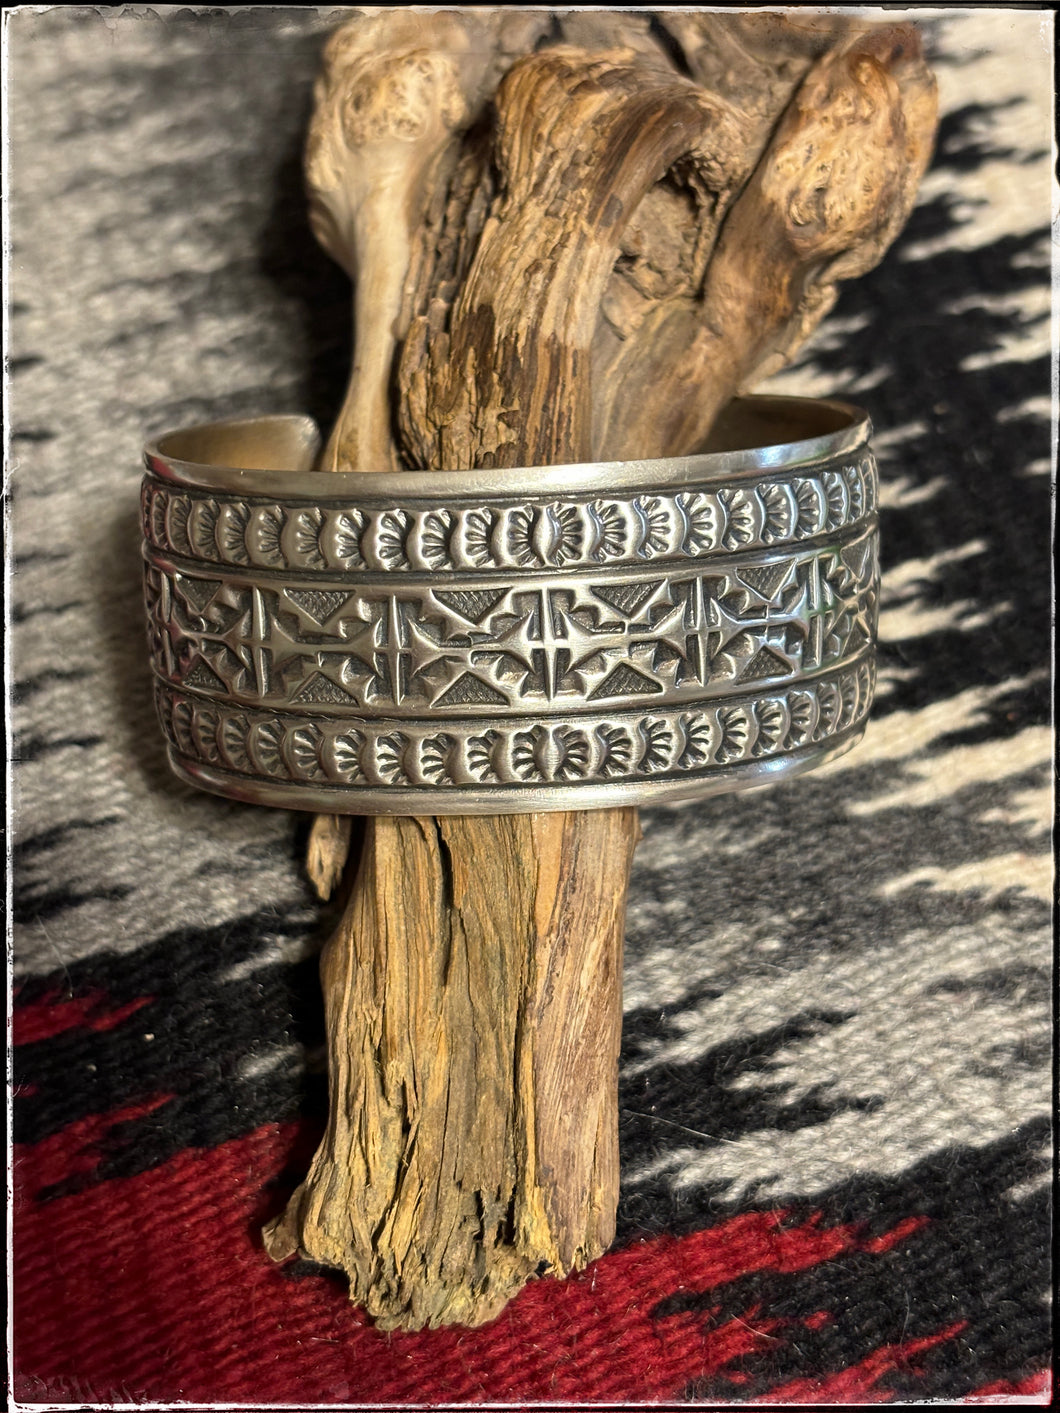 Handstamped, sterling silver cuff from Navajo silversmith Sunshine Reeves.